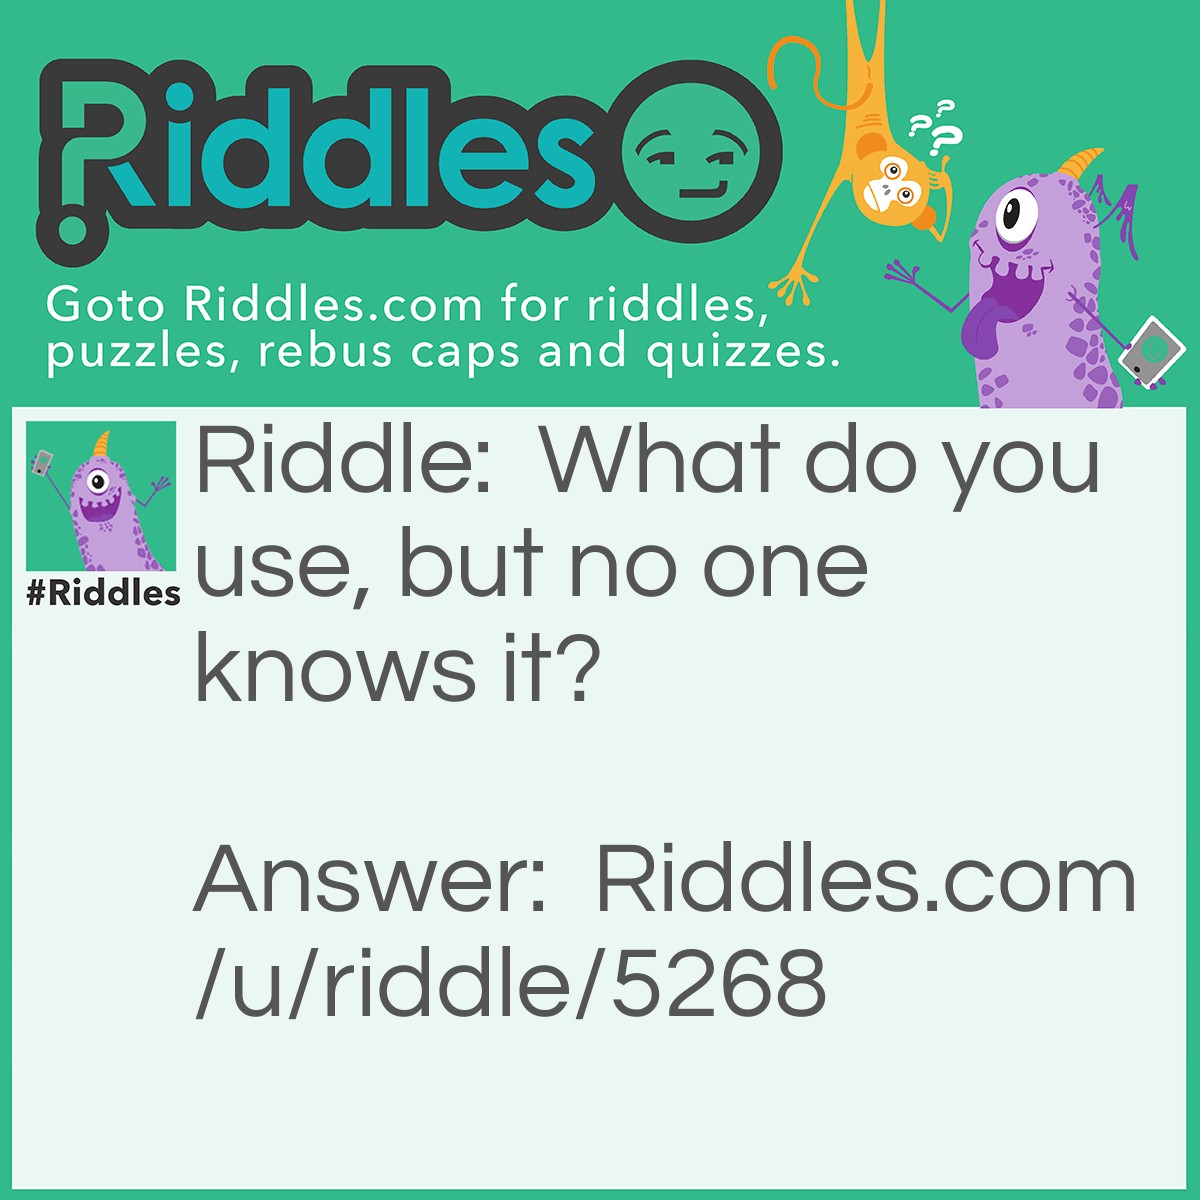 Riddle: What do you use, but no one knows it? Answer: Your password.